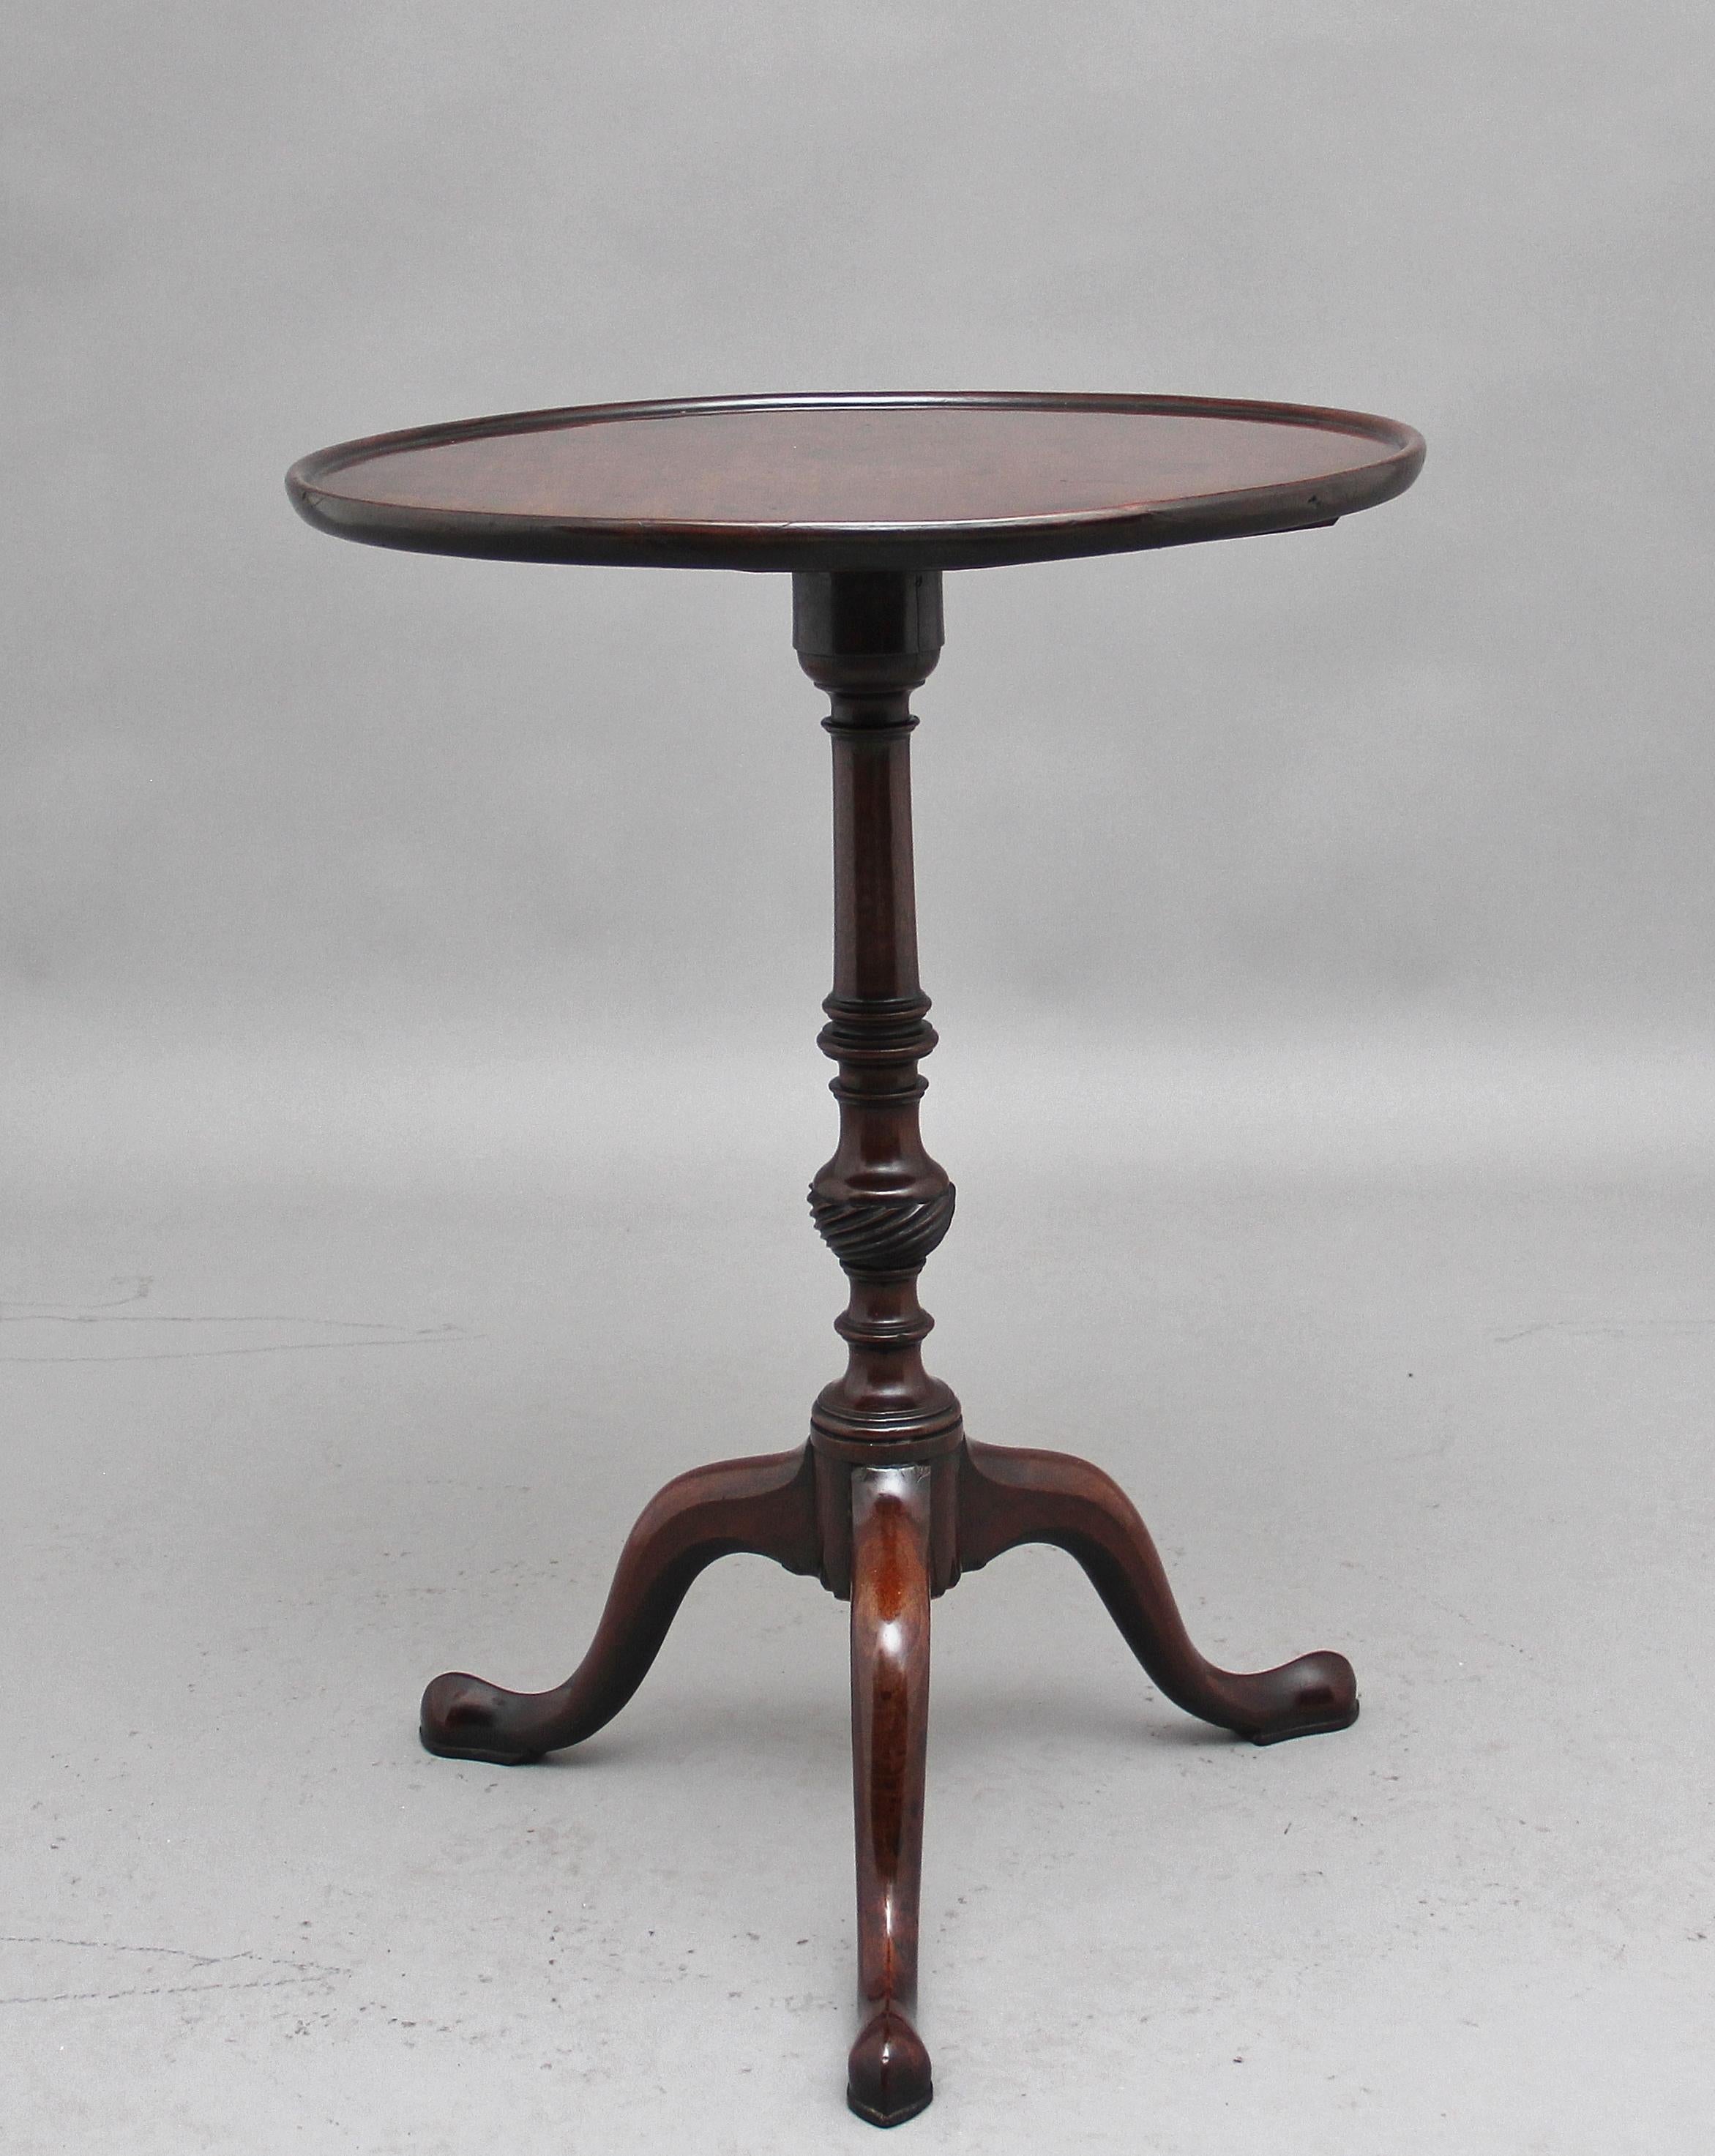 Early 19th century mahogany wine table with a circular dished top supported on a wonderfully turned and carved column terminating with three slender shaped legs, circa 1820.
 